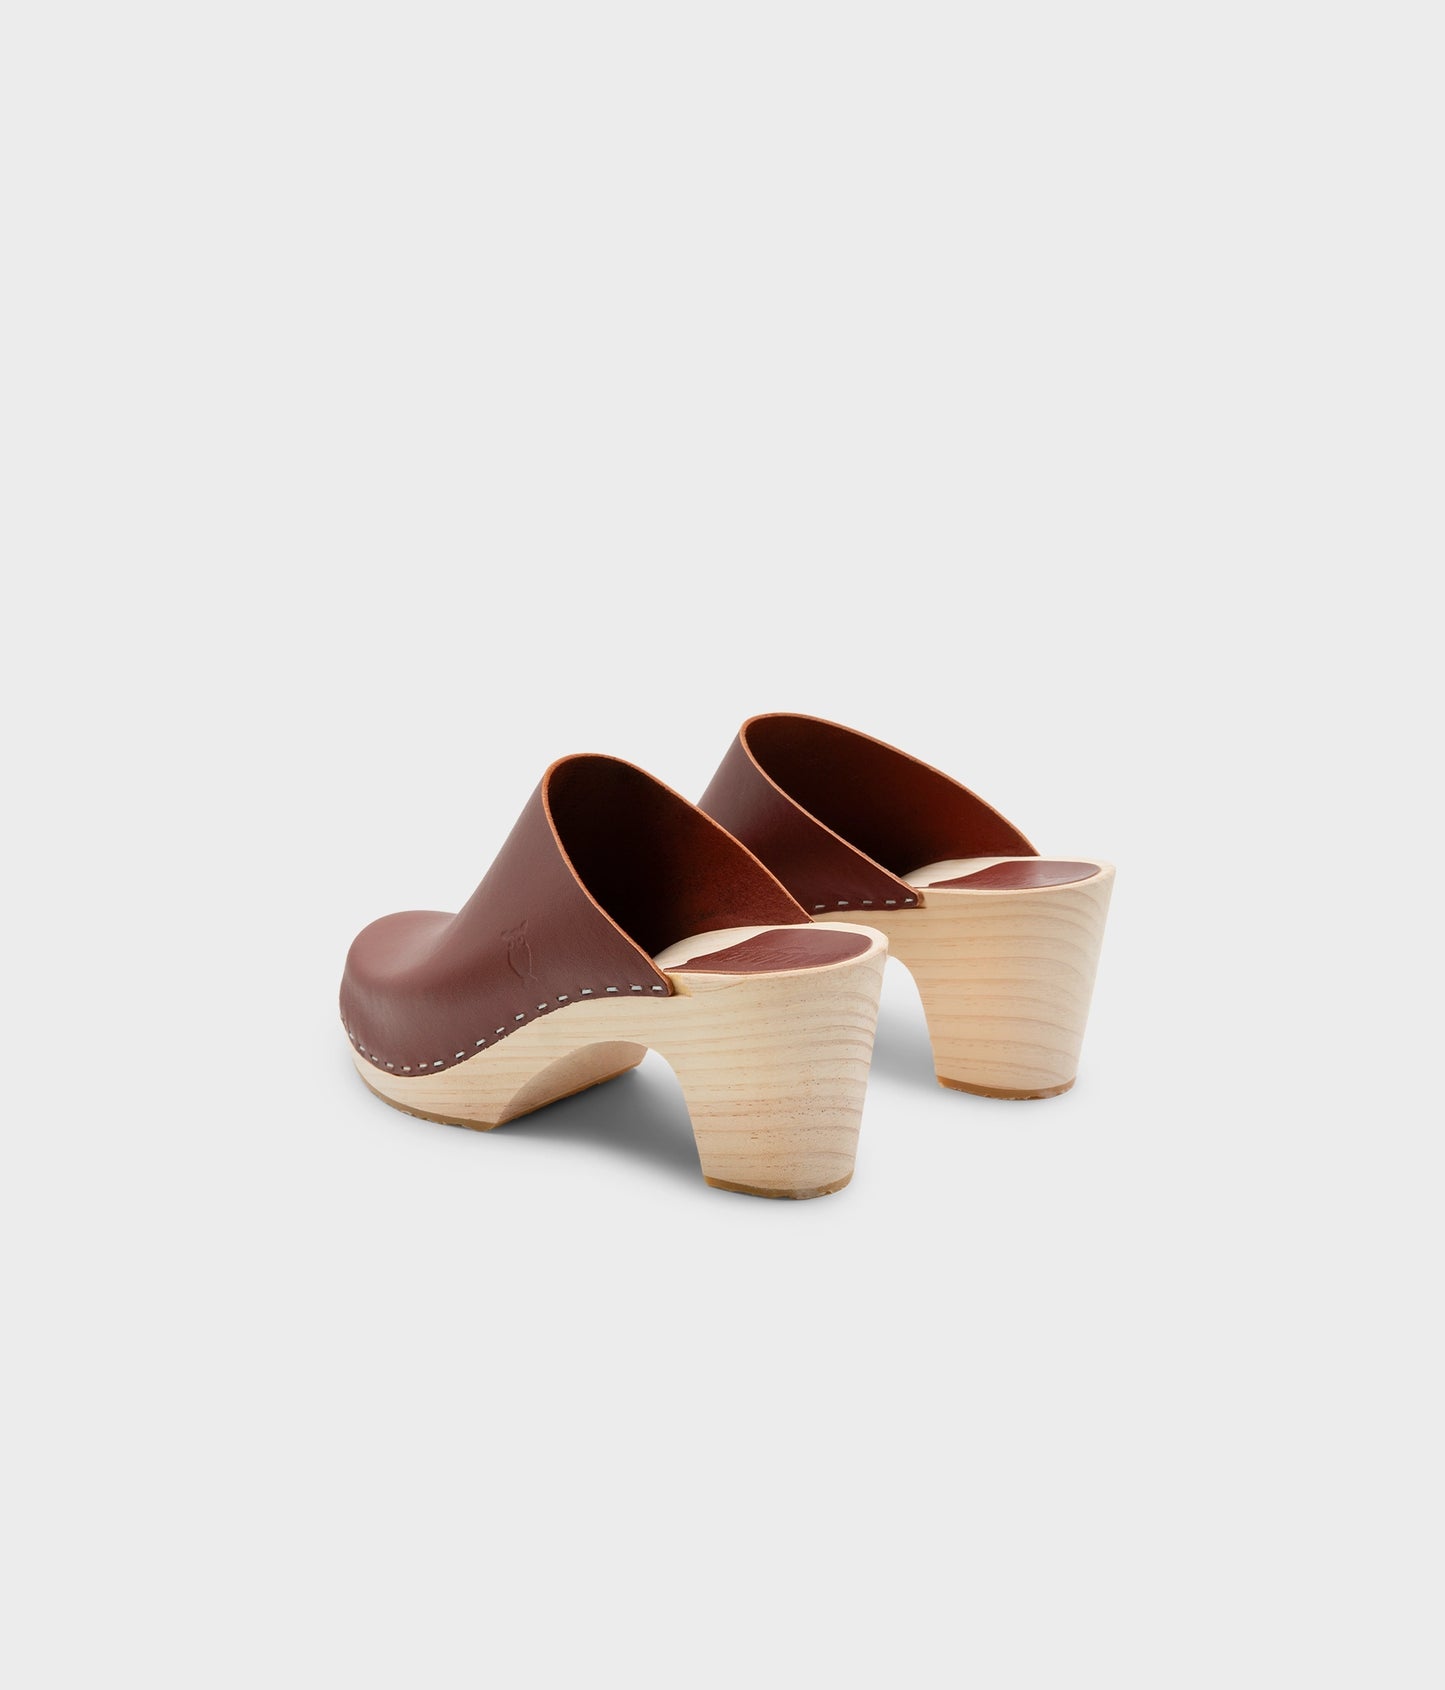 high rise minimalistic clog mule in cognac red vegetable tanned leather stapled on a light wooden base